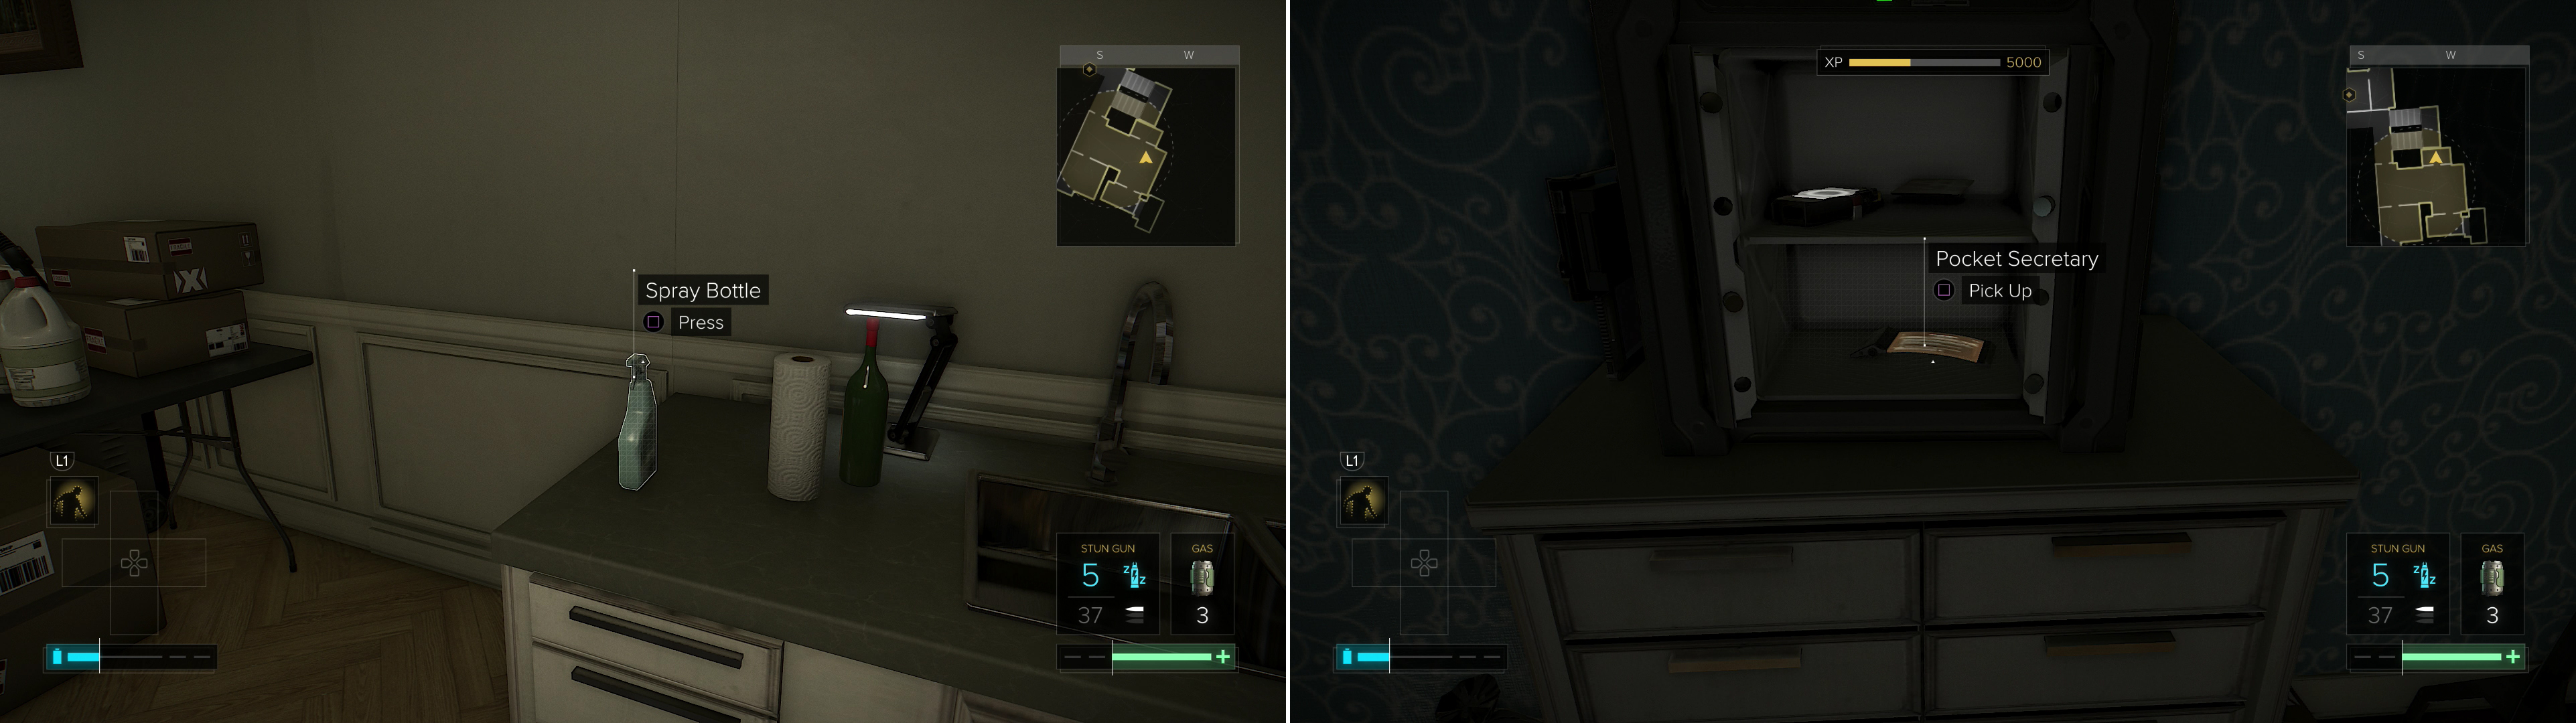 Press a Spray Bottle to reveal a secret door (left) then loot a safe to find a Pocket Secretary with the location of the Neon Lab on it (right).